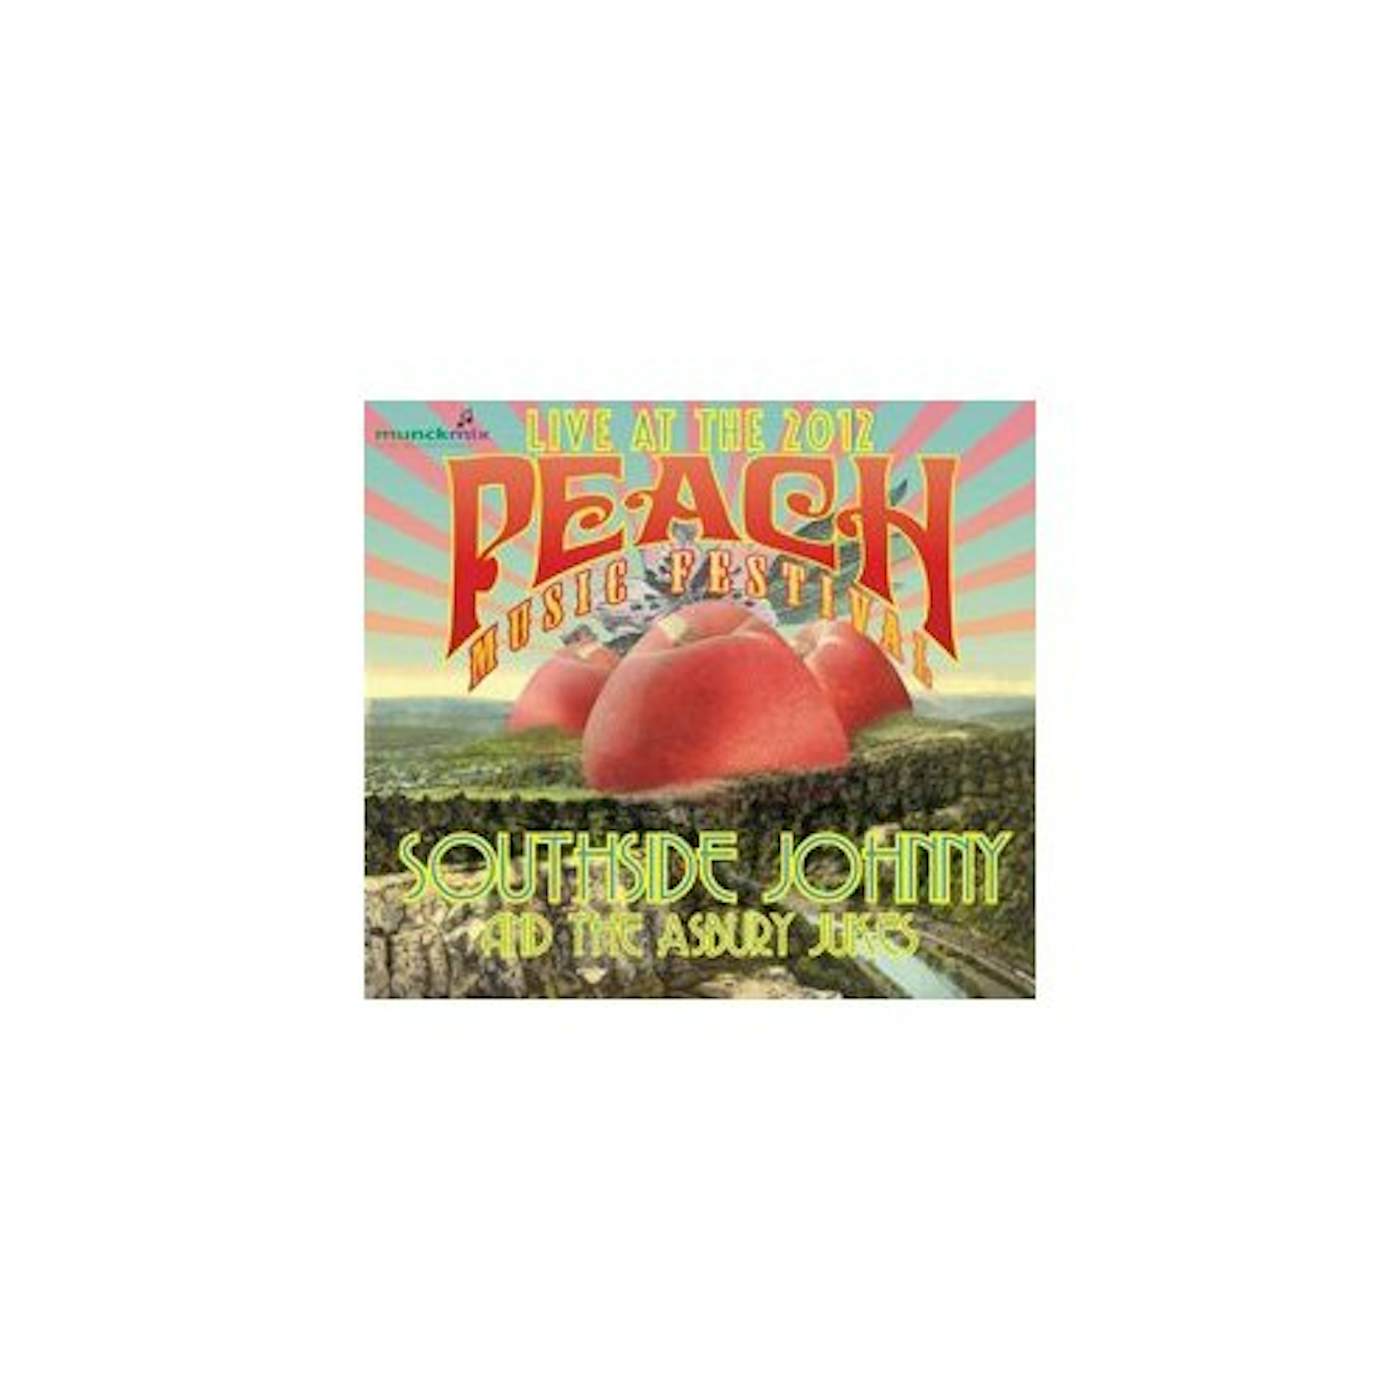 Southside Johnny And The Asbury Jukes LIVE AT PEACH MUSIC FESTIVAL 2012 CD